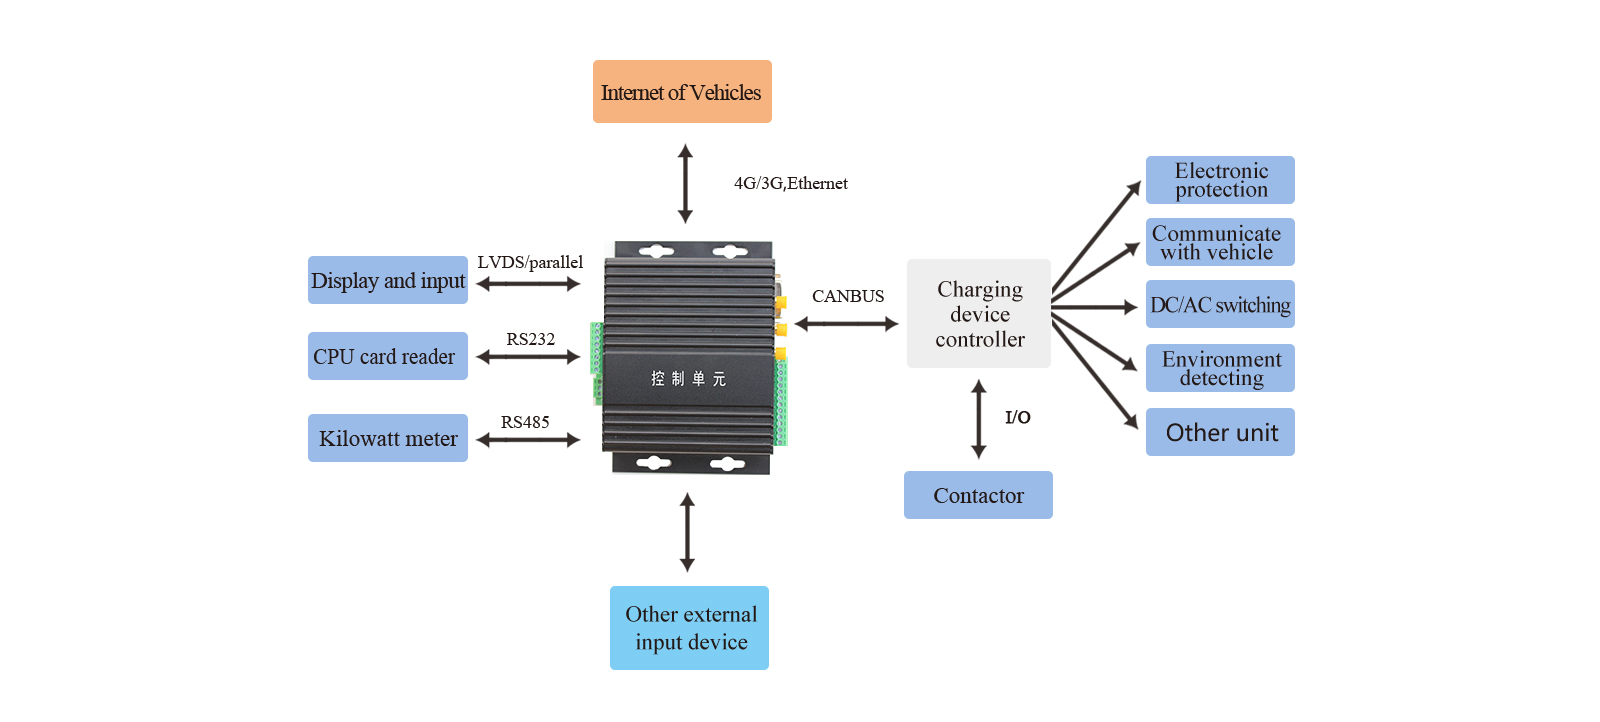 FCU1103 Embedded Computer can meet all demands for power charging metering